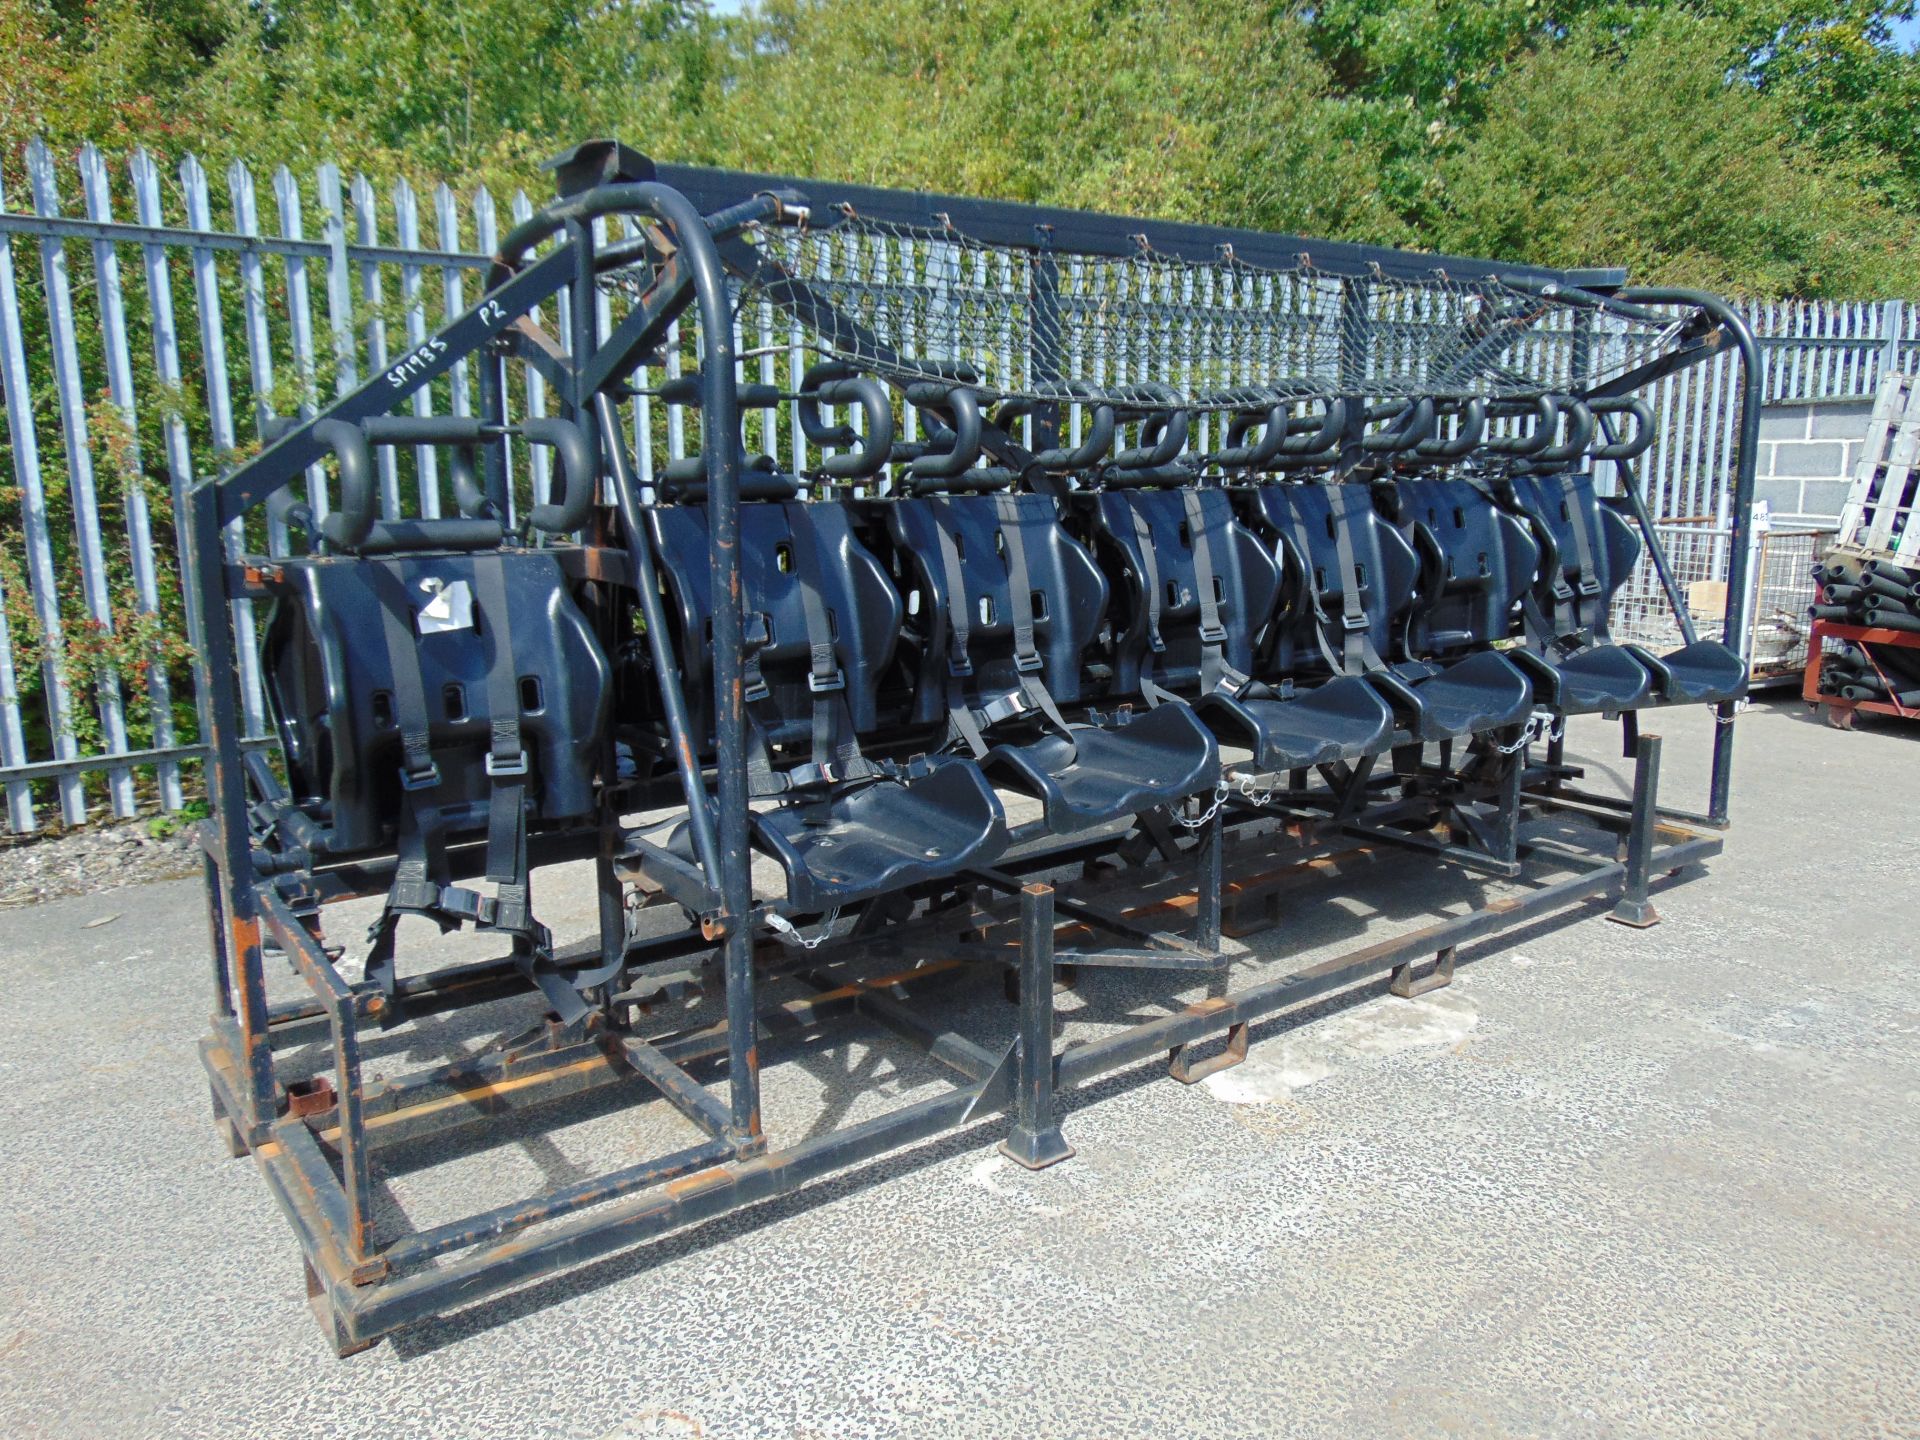 14 Man Security Seat suitable for Leyland Dafs, Bedfords etc - Image 2 of 9